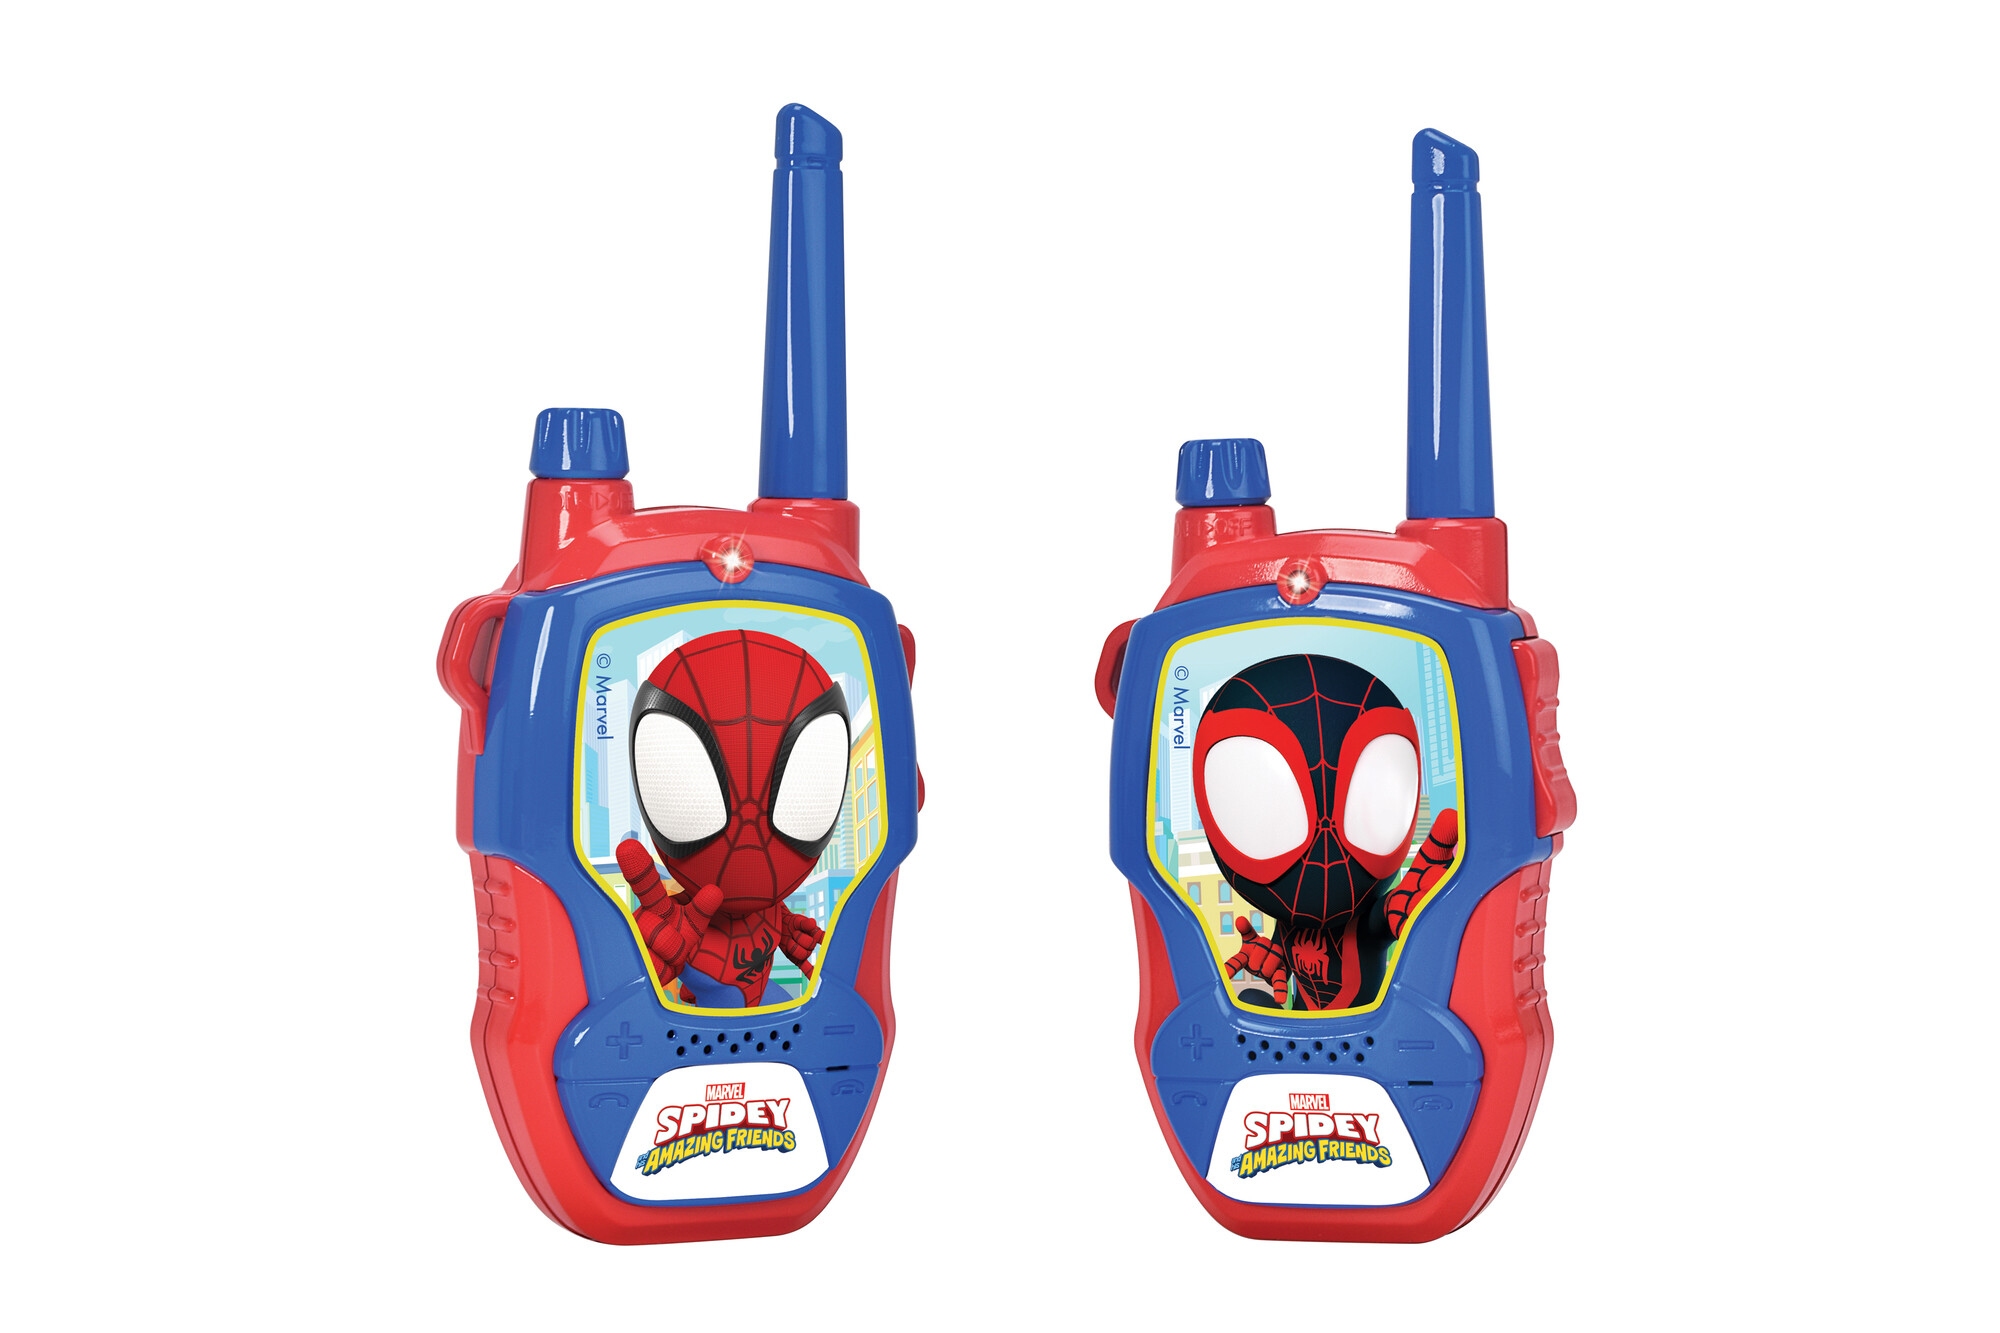 Due walkie talkie di spidey and his amazing friends - SPIDEY